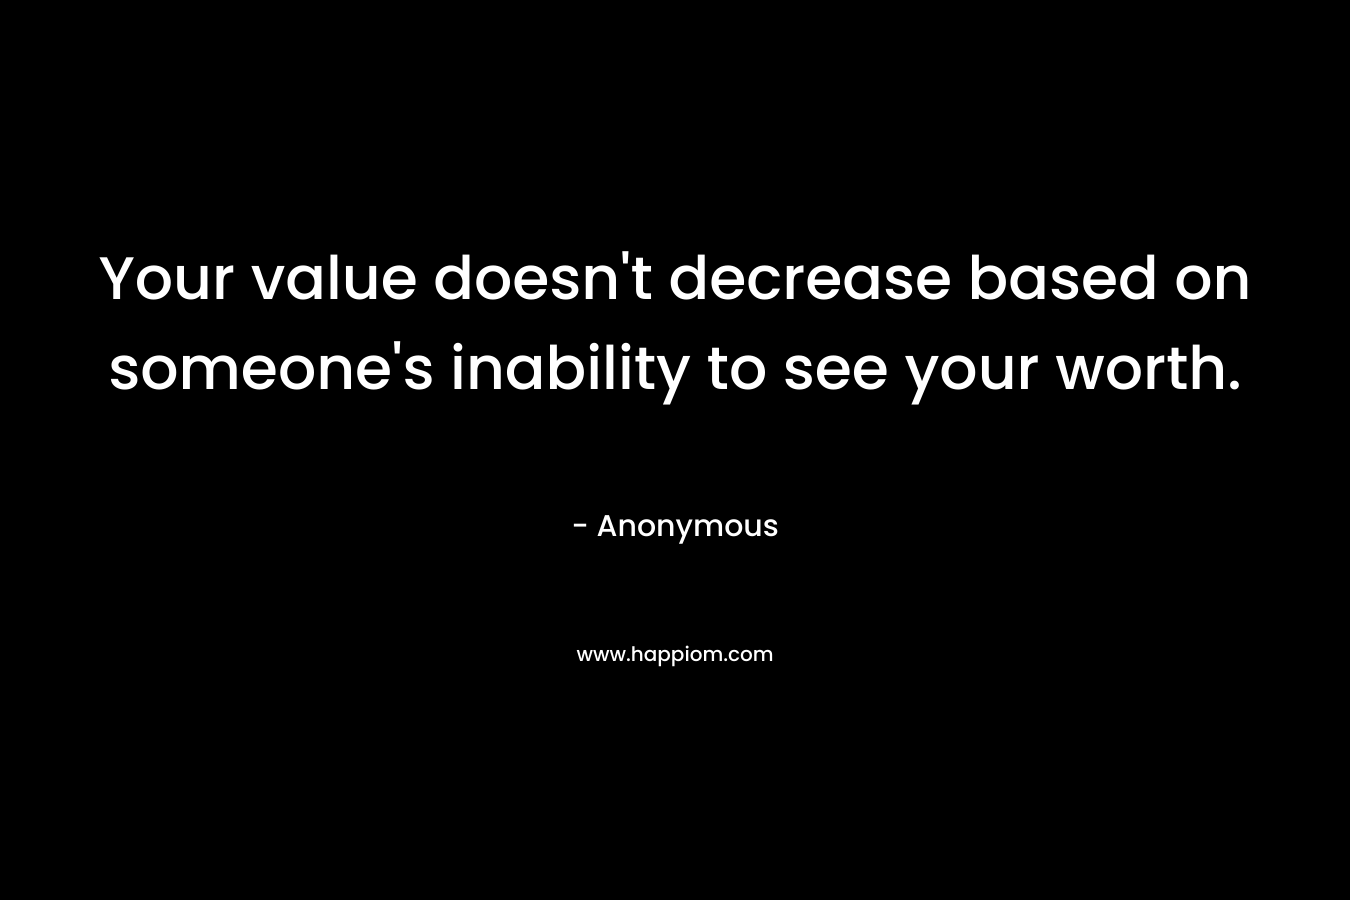 Your value doesn’t decrease based on someone’s inability to see your worth. – Anonymous